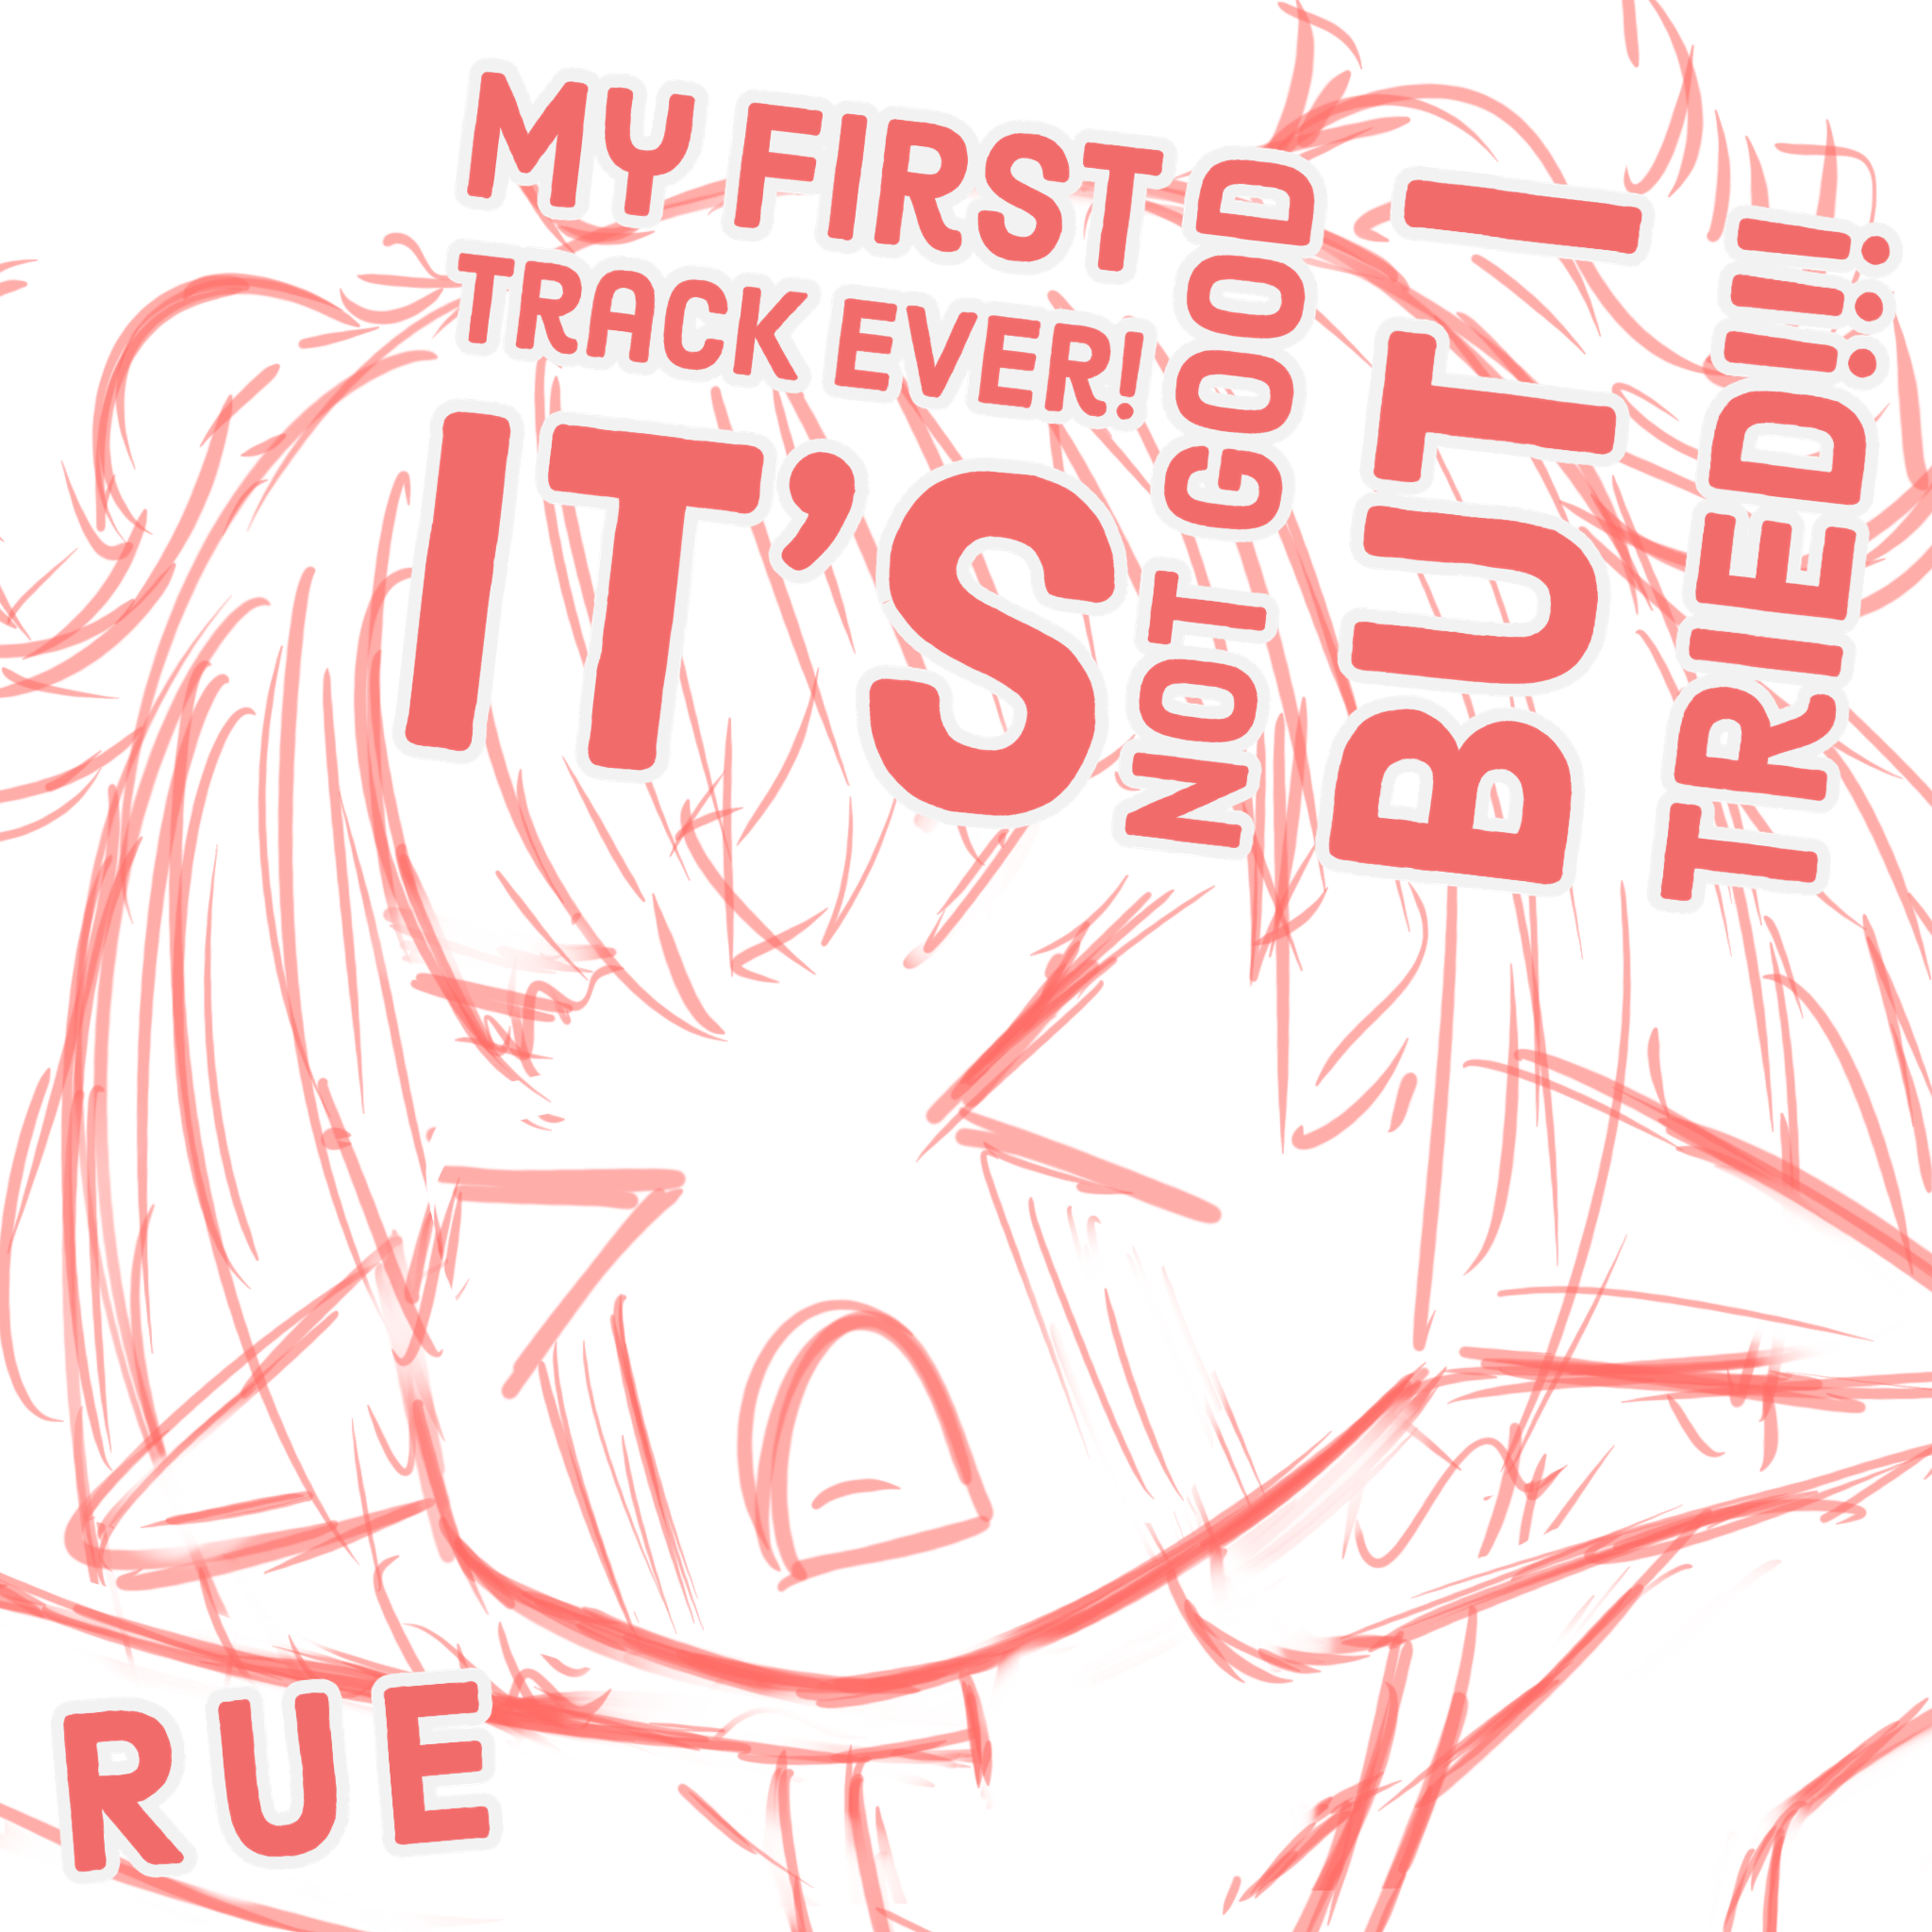 Album art for “My First Track Ever! It's Not Good But I Tried!!!” It’s red and contains a bad sketch with some giant text on top.